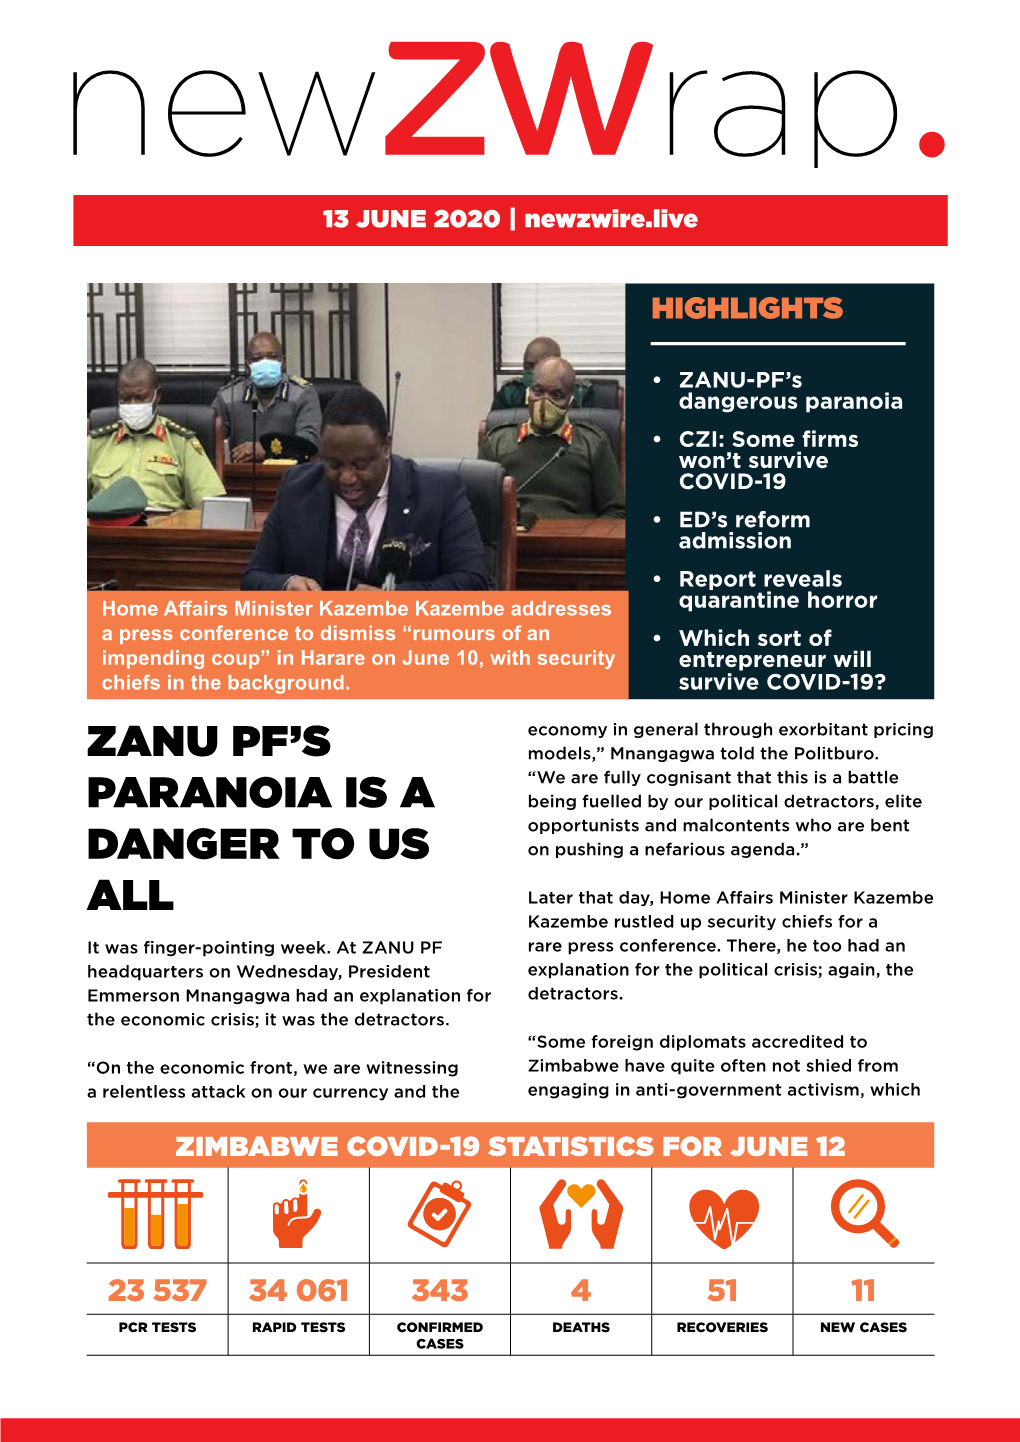 Zanu Pf's Paranoia Is a Danger to Us